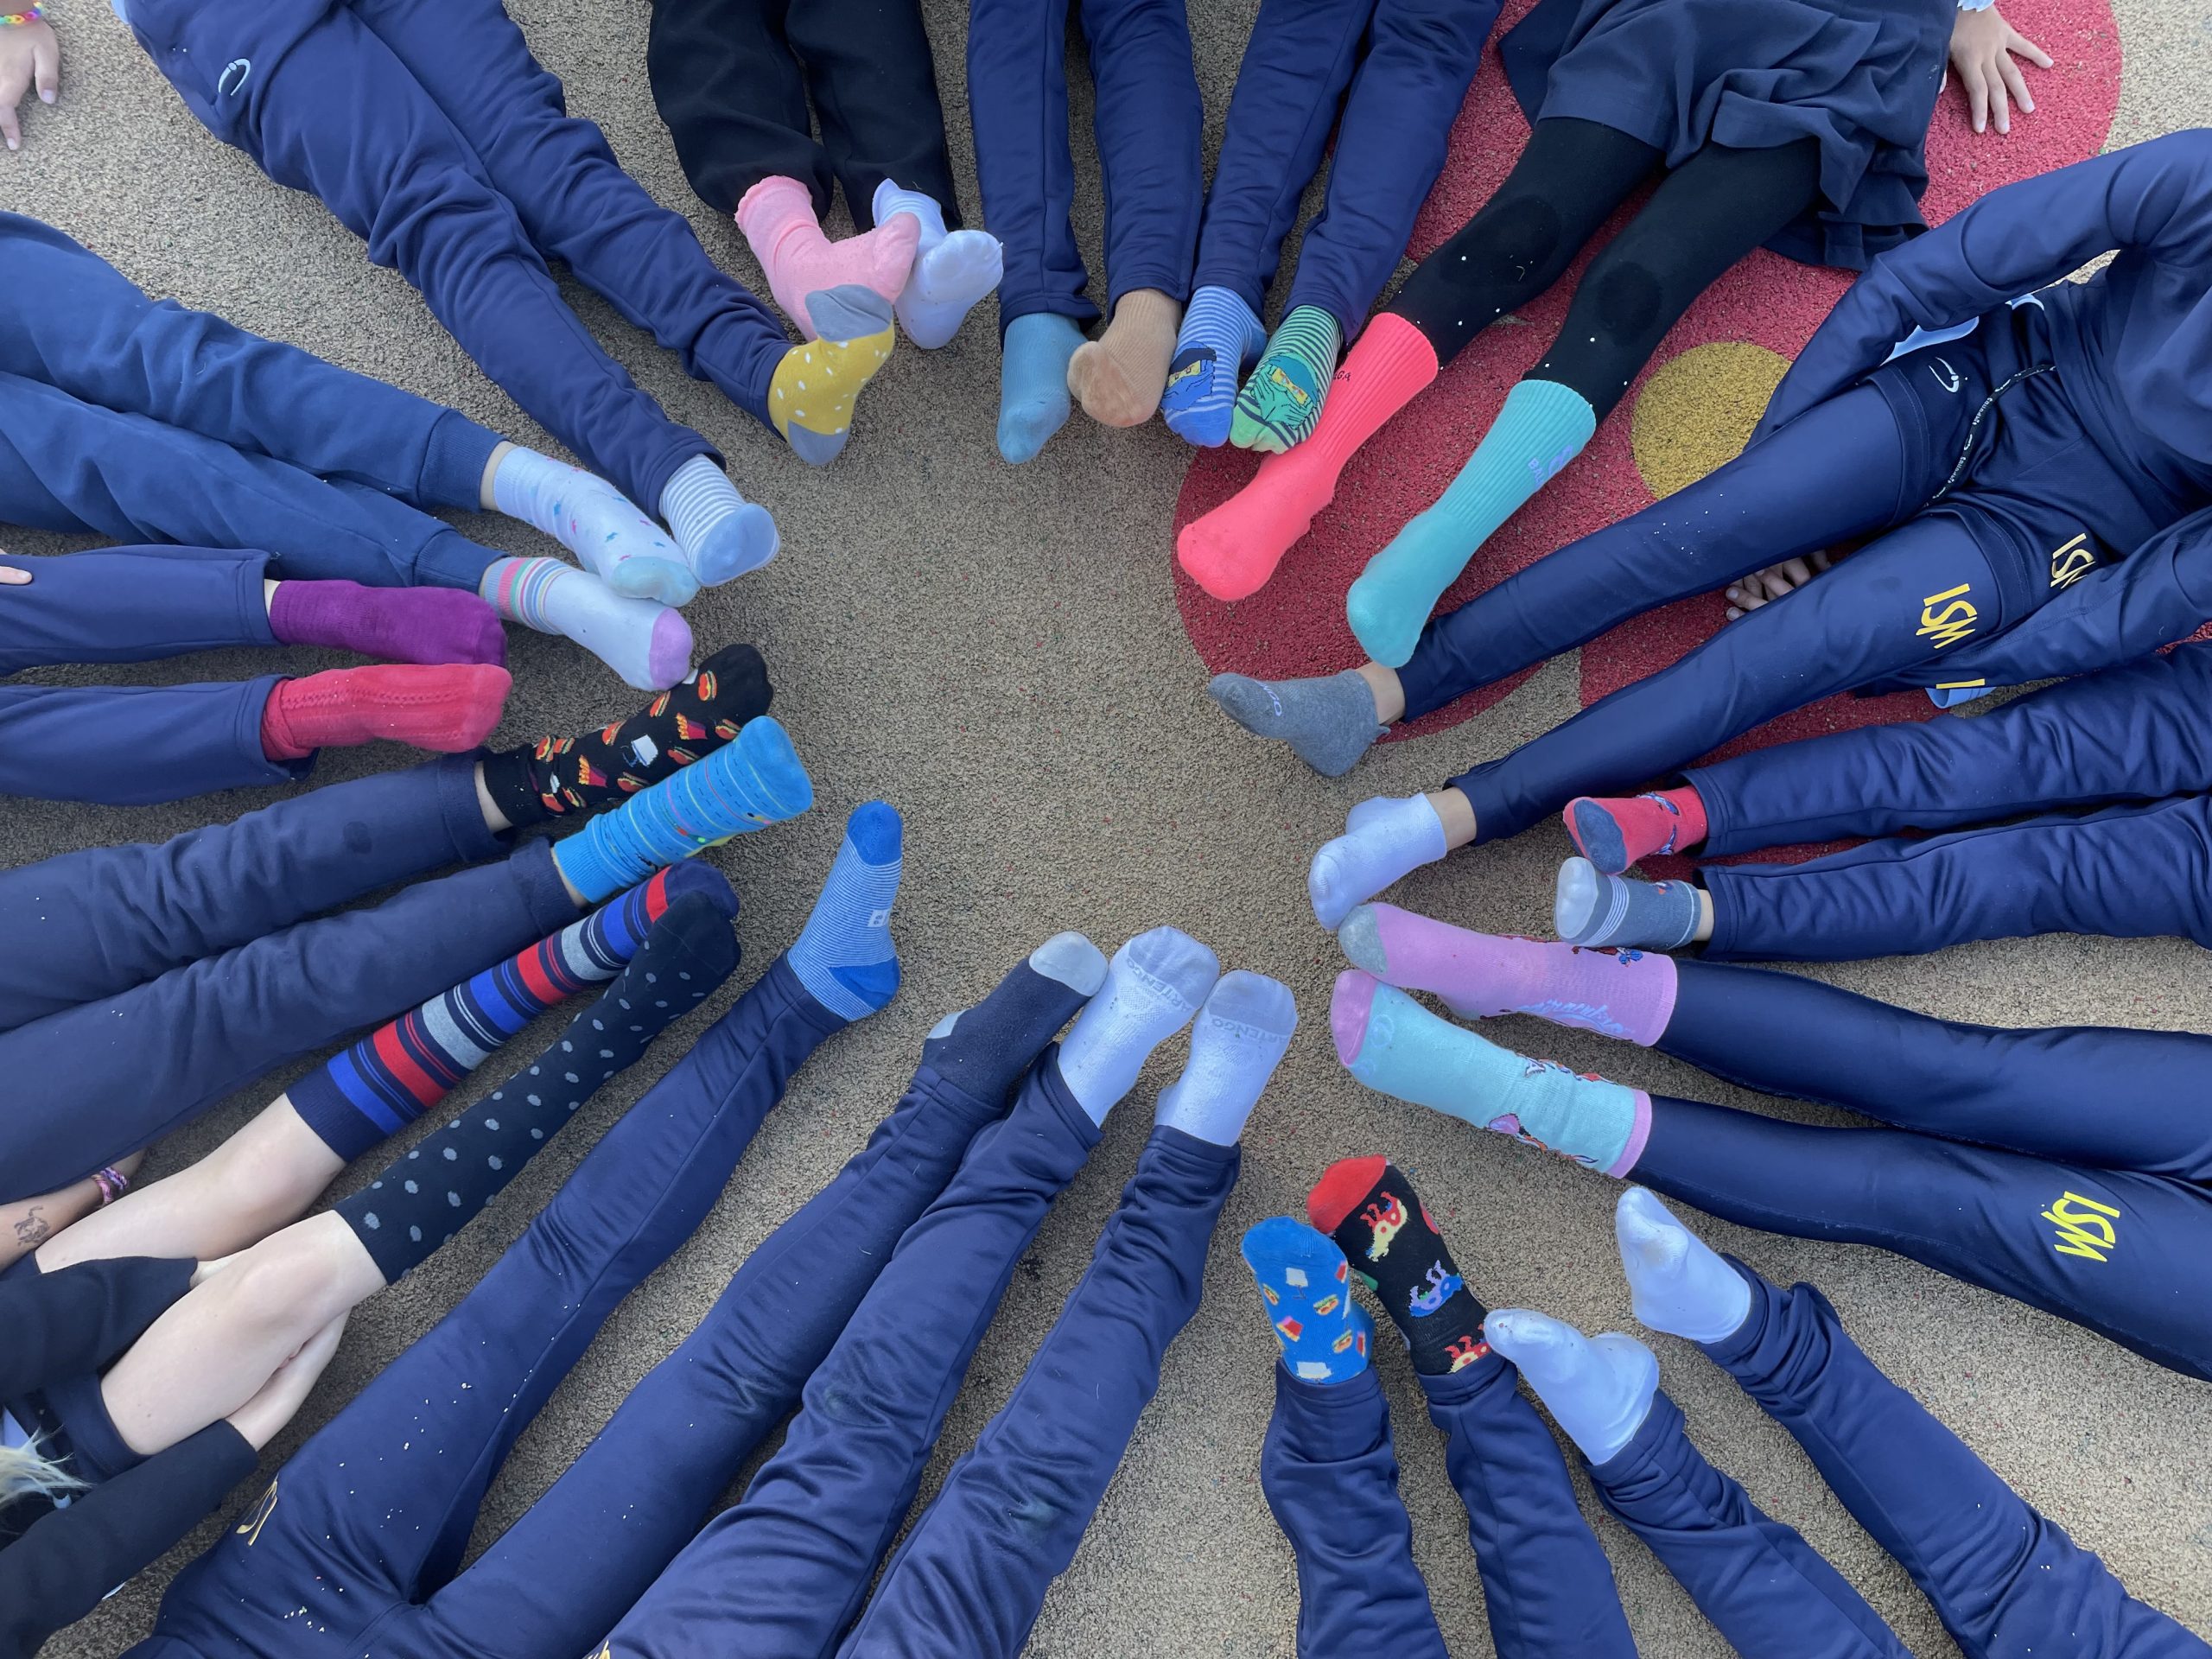 ISM students celebrate individuality with Odd Socks Day Image